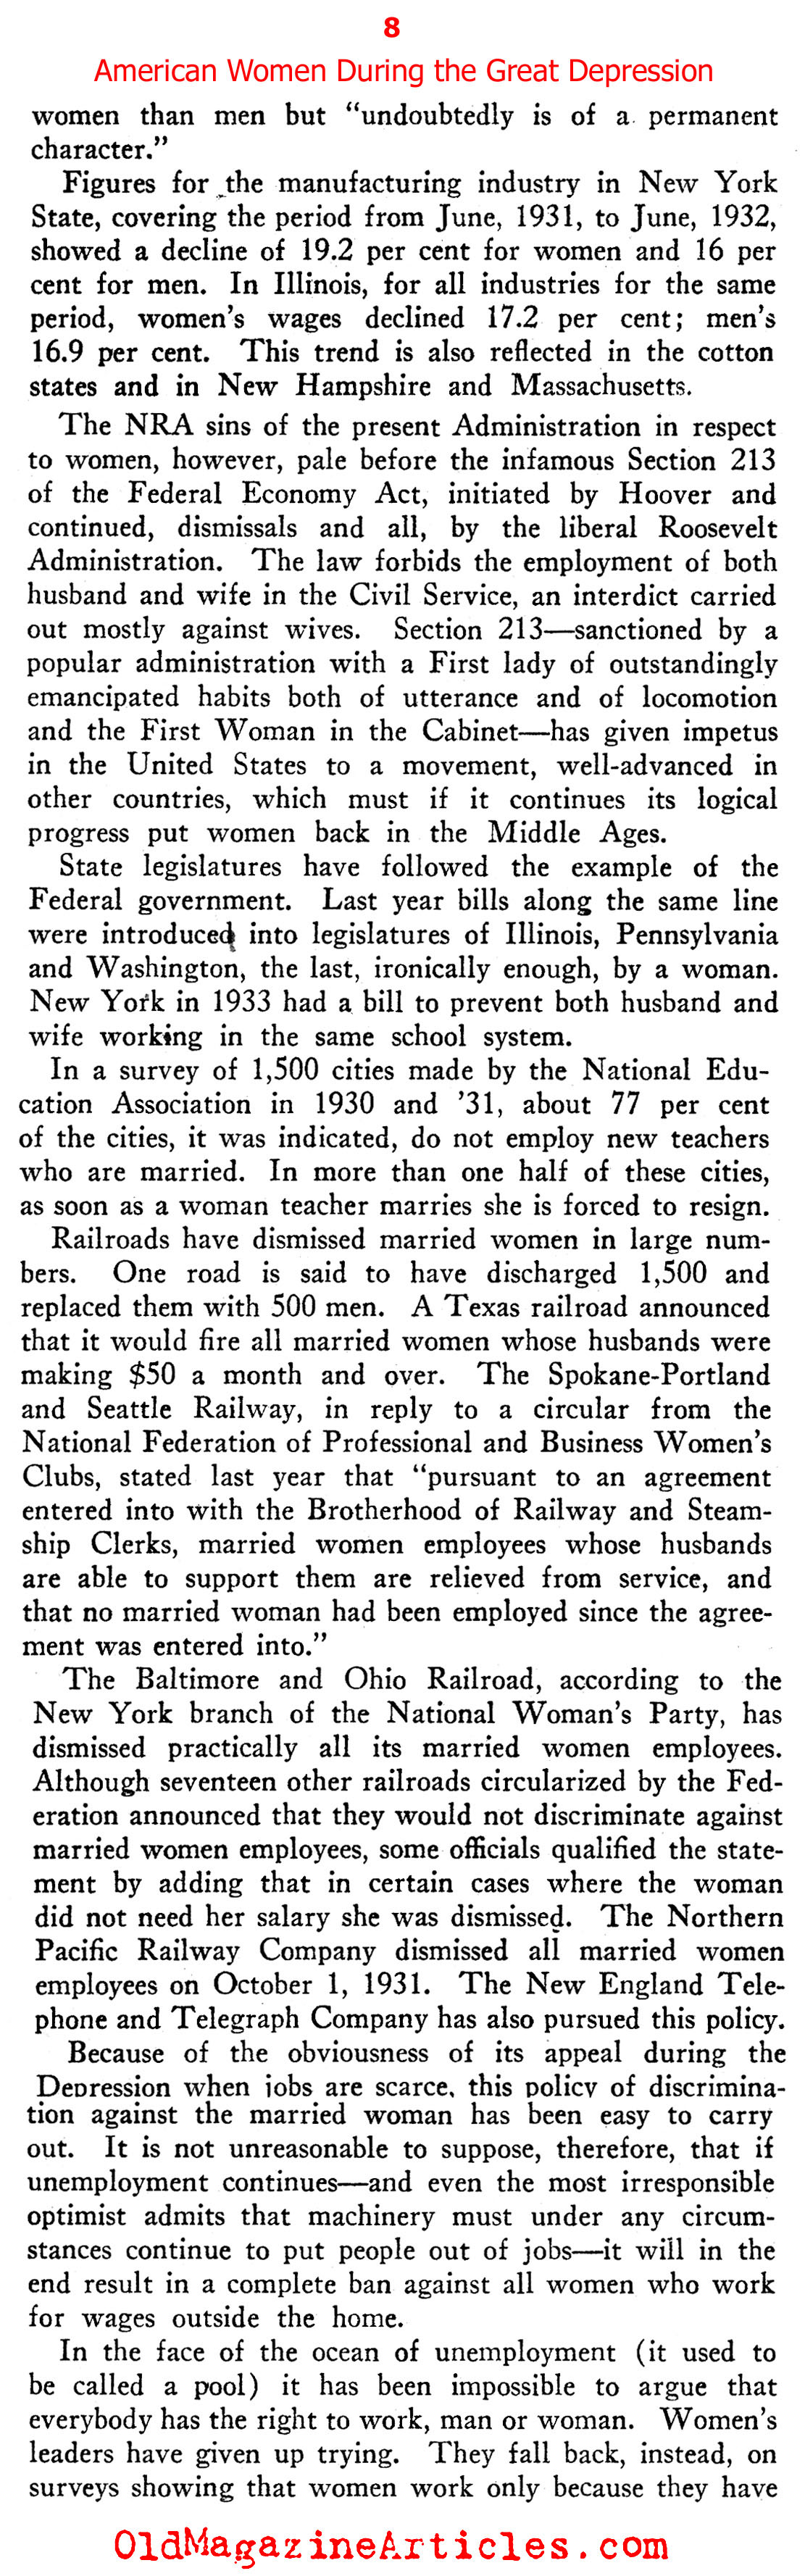 The Lot of Women in the Great Depression (New Outlook Magazine, 1934)